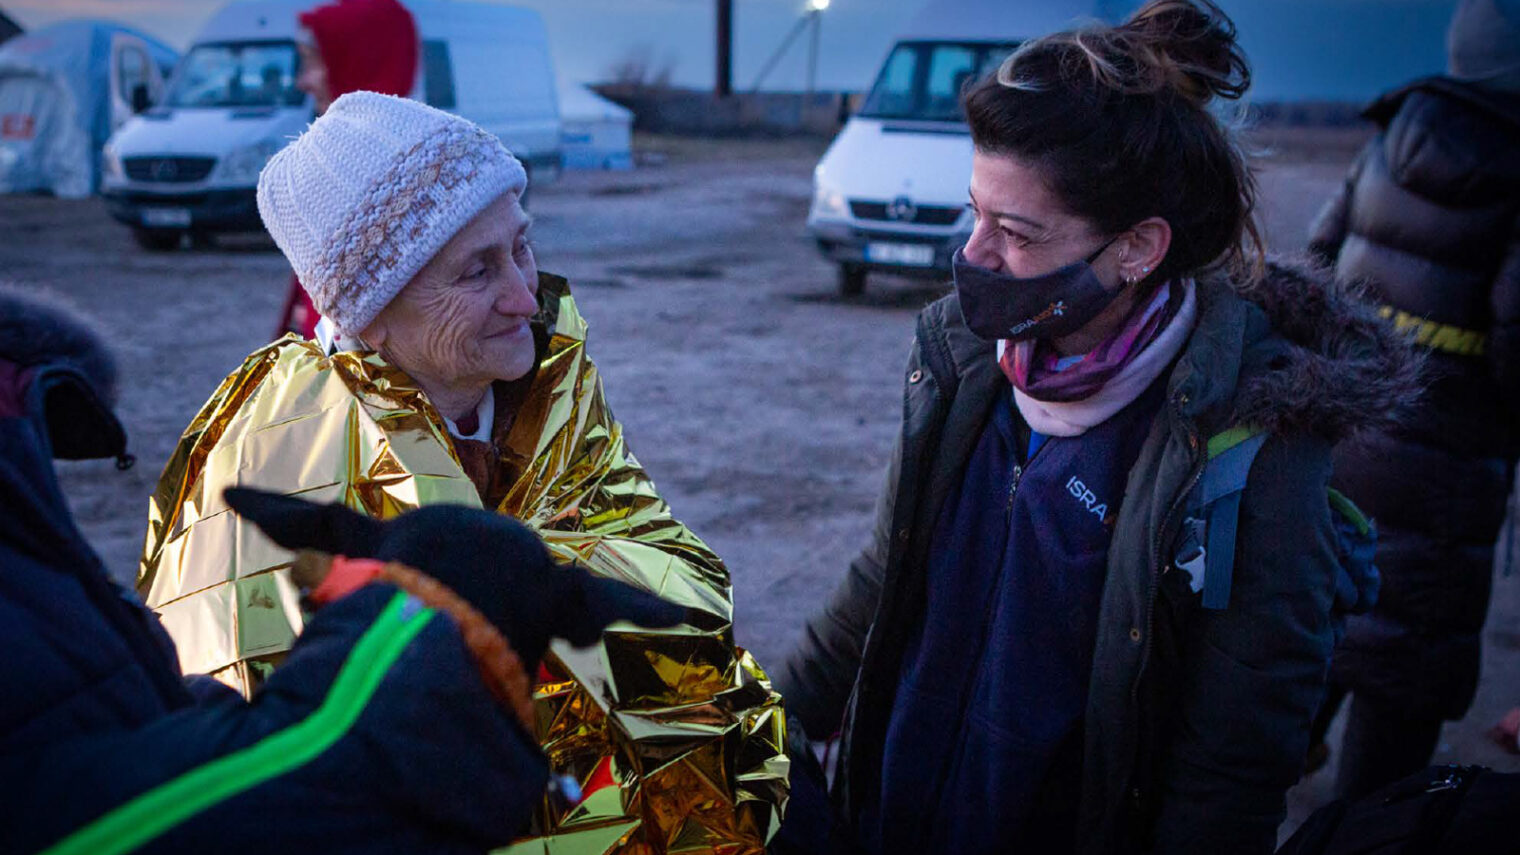 Naama Gorodischer, Global Chief Humanitarian & Resilience Officer of IsraAID, comforting a Ukrainian refugee in Moldova. Since February, IsraAID has been supporting refugees across Moldova with essential protection, education, healthcare, and relief items. Photo by Mickey Noam Alon